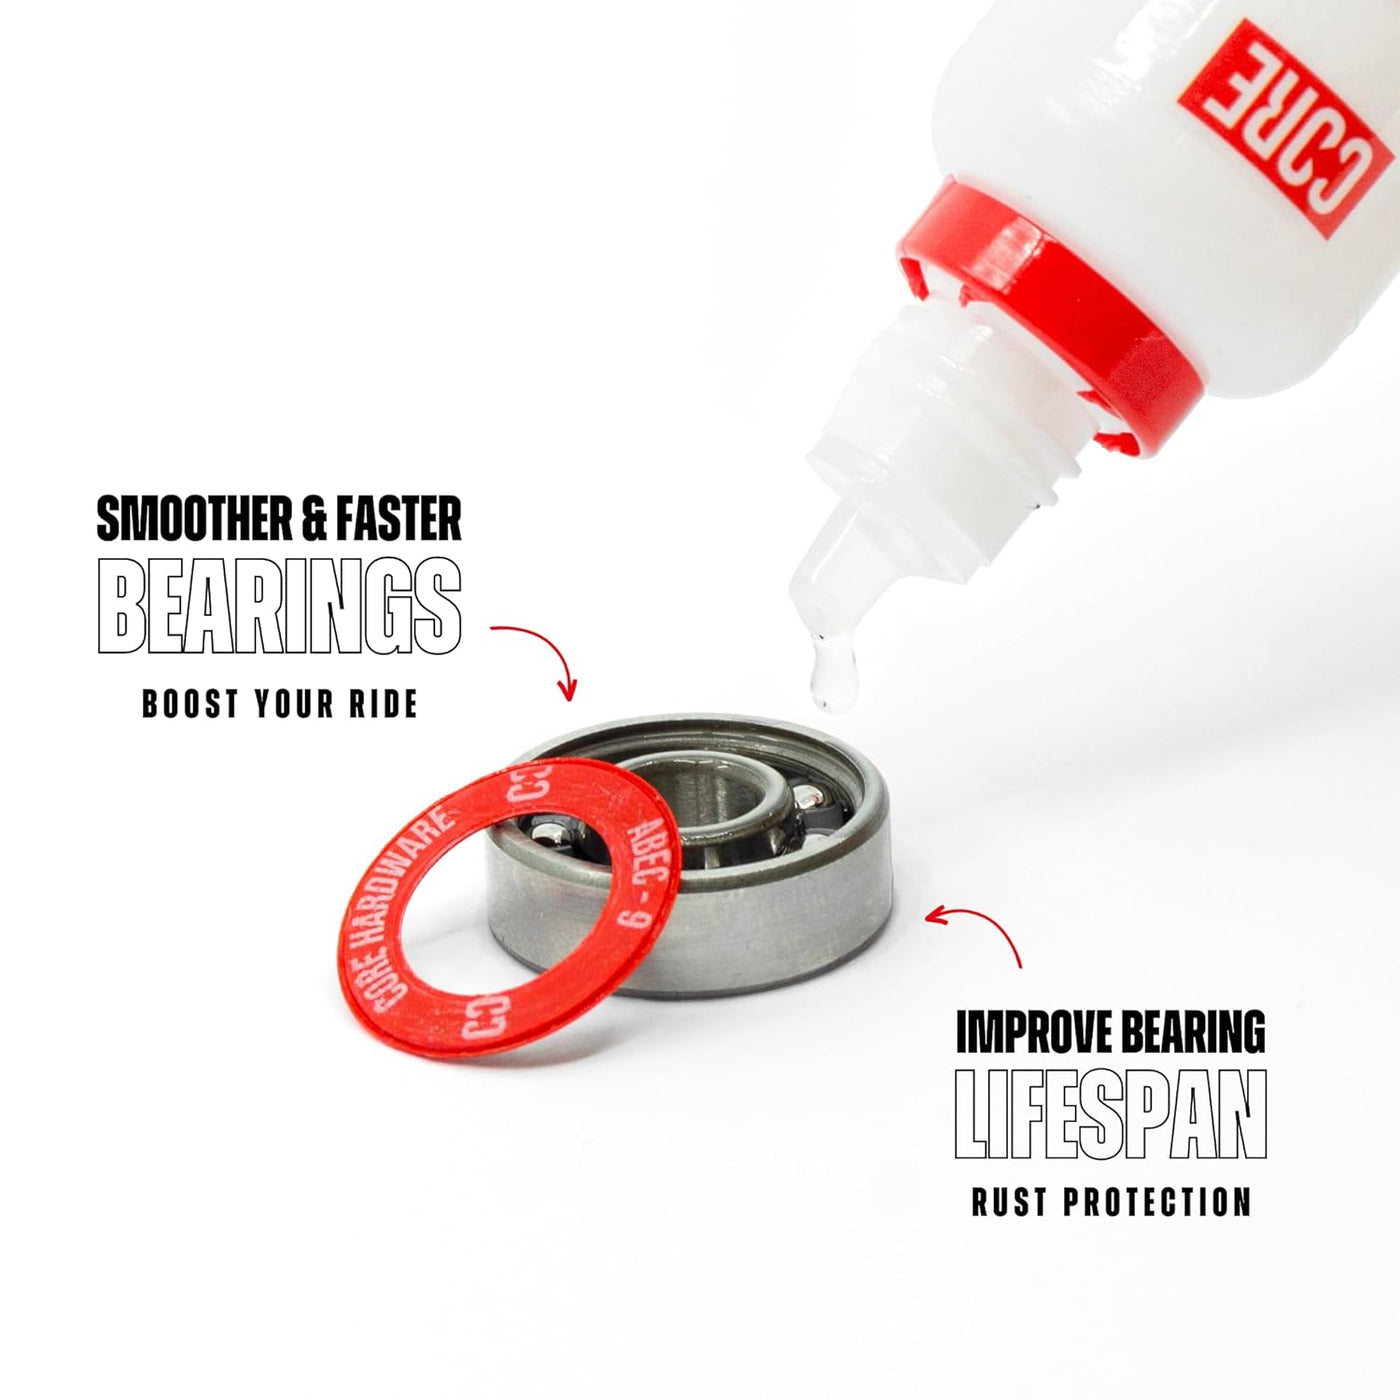 CORE Bearing Lube for Skate/Scooter, 15ml